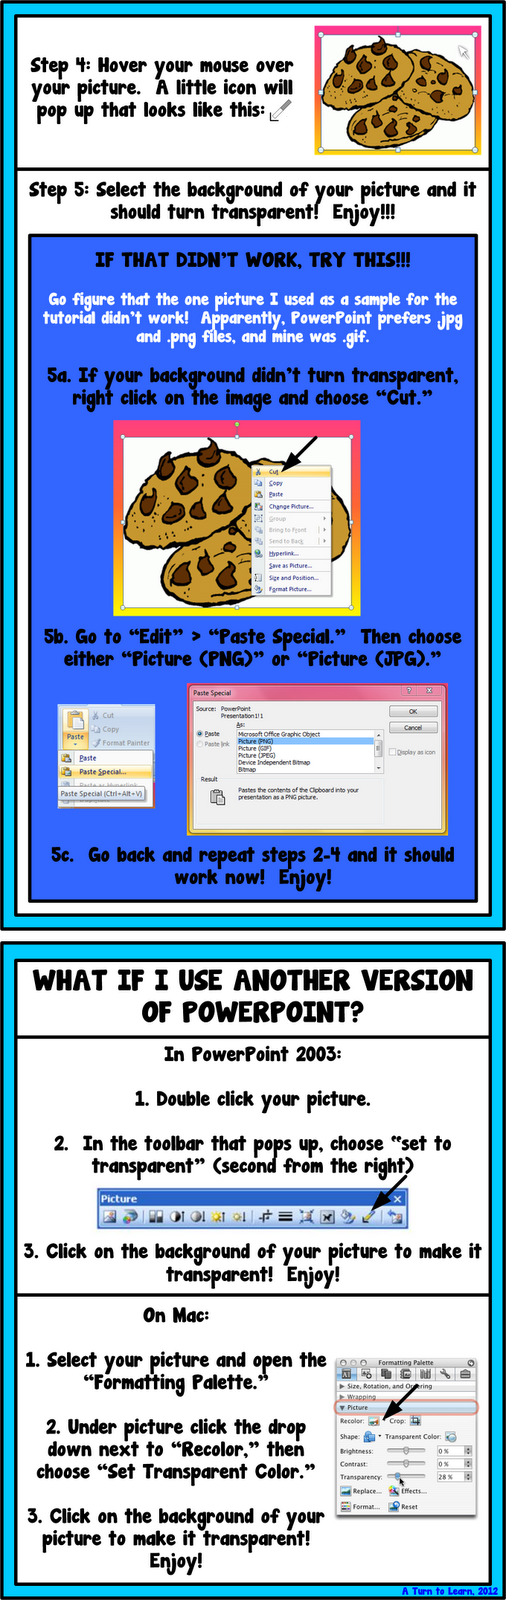 Give Clipart a Transparent Background in PowerPoint! • A Turn to Learn